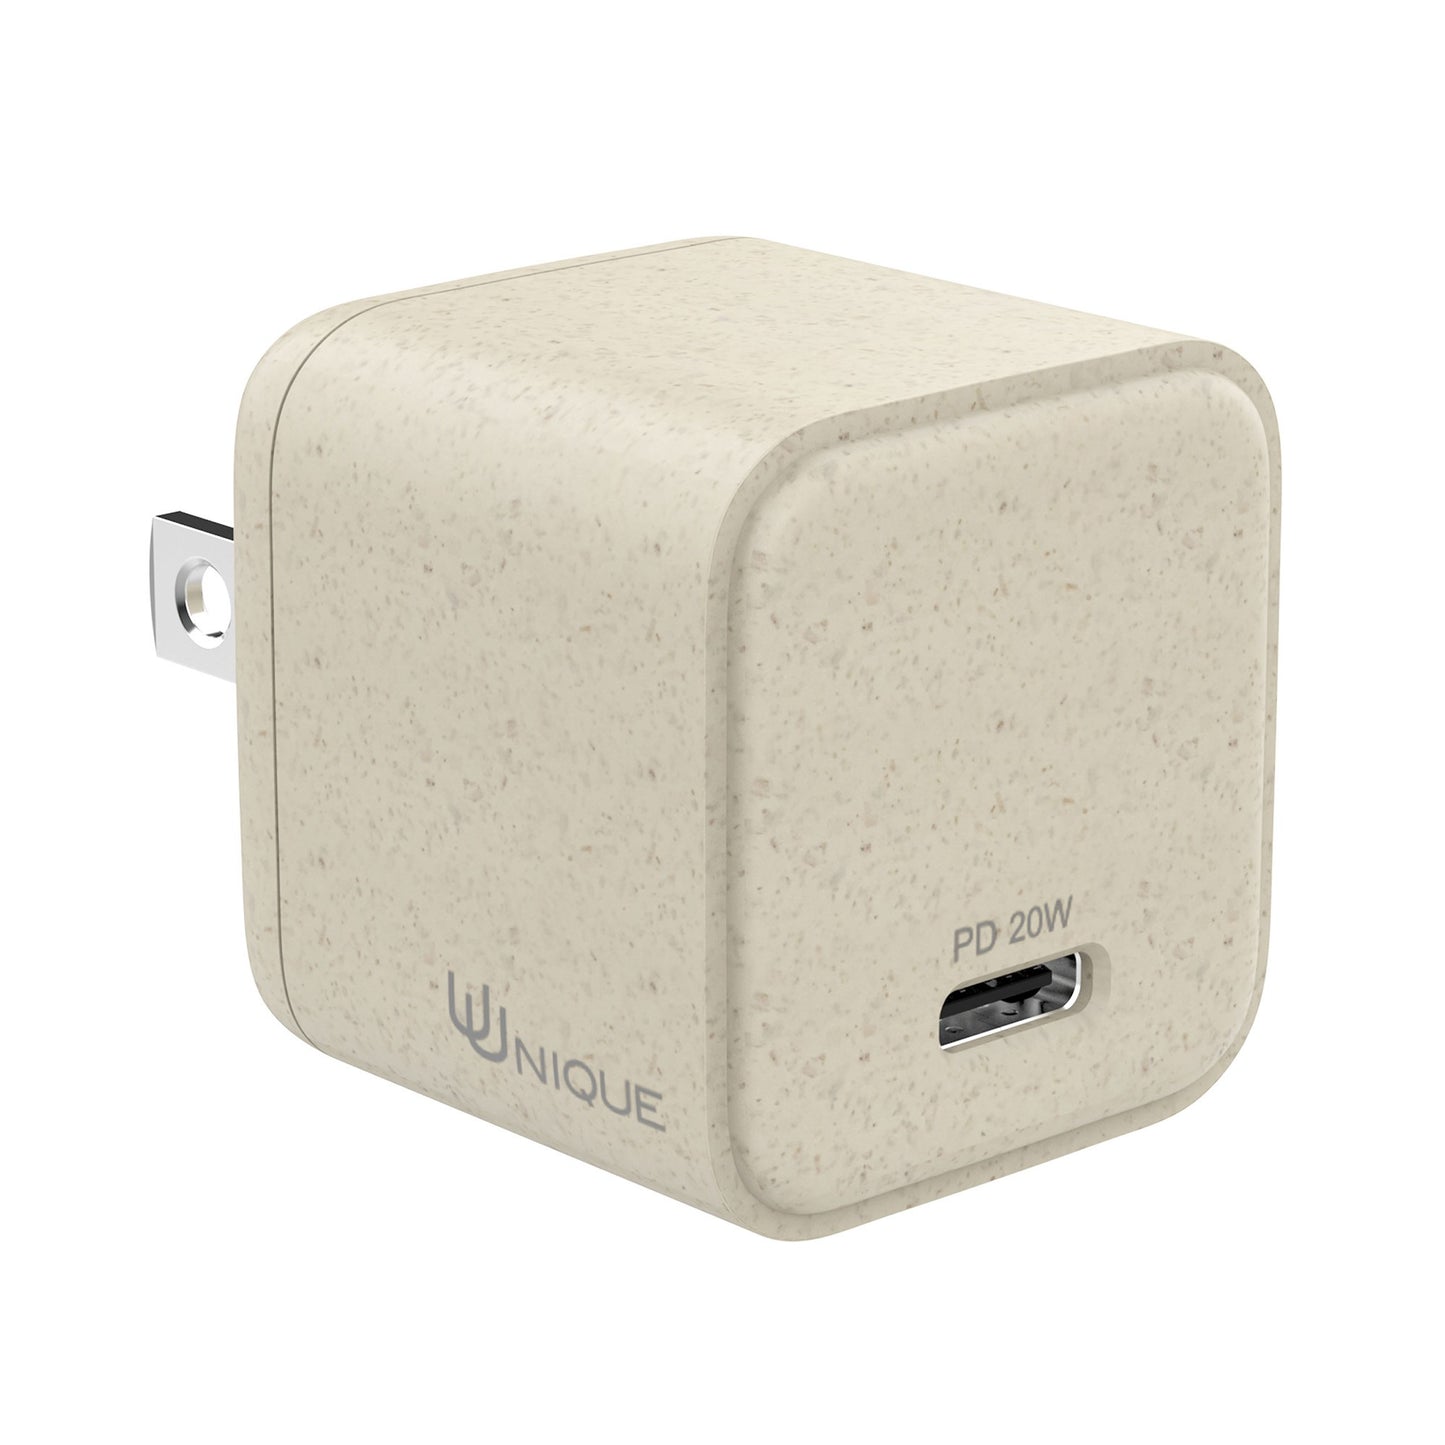 Uunique 20W PD Eco USB-C to USB-C Charger - White - 15-09761